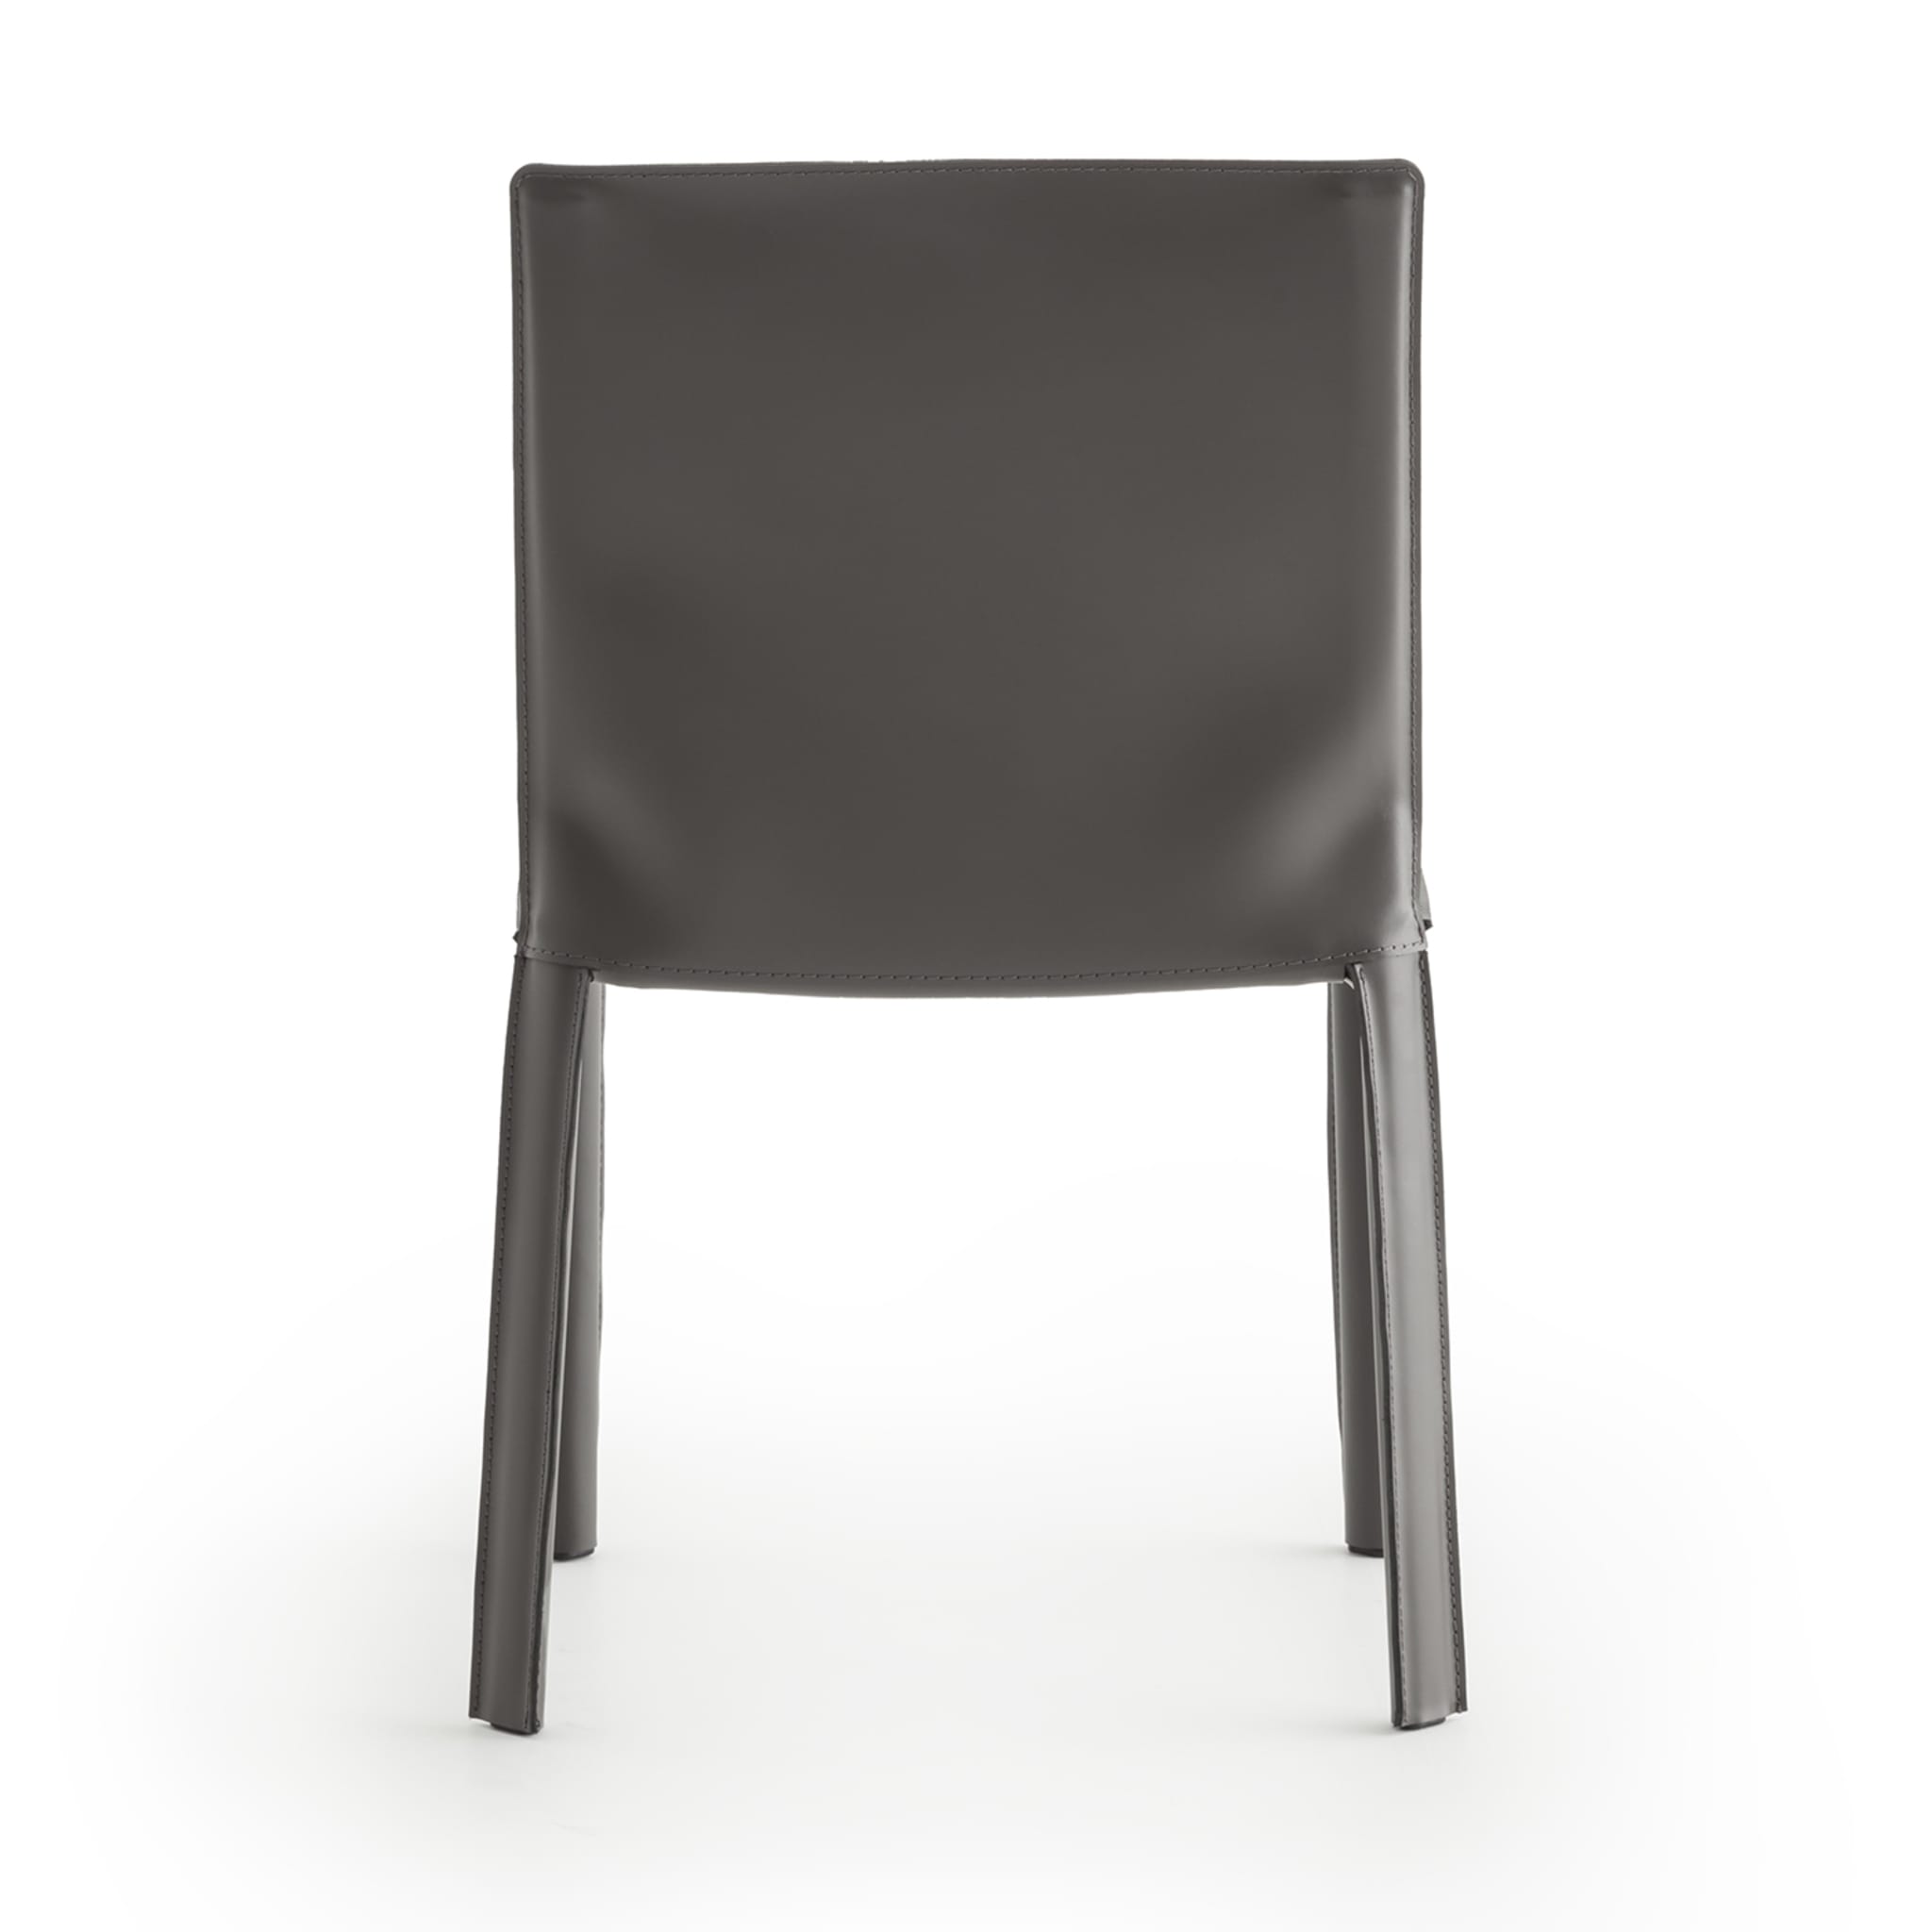 Jumpsuite Gray Leather Chair - Alternative view 4